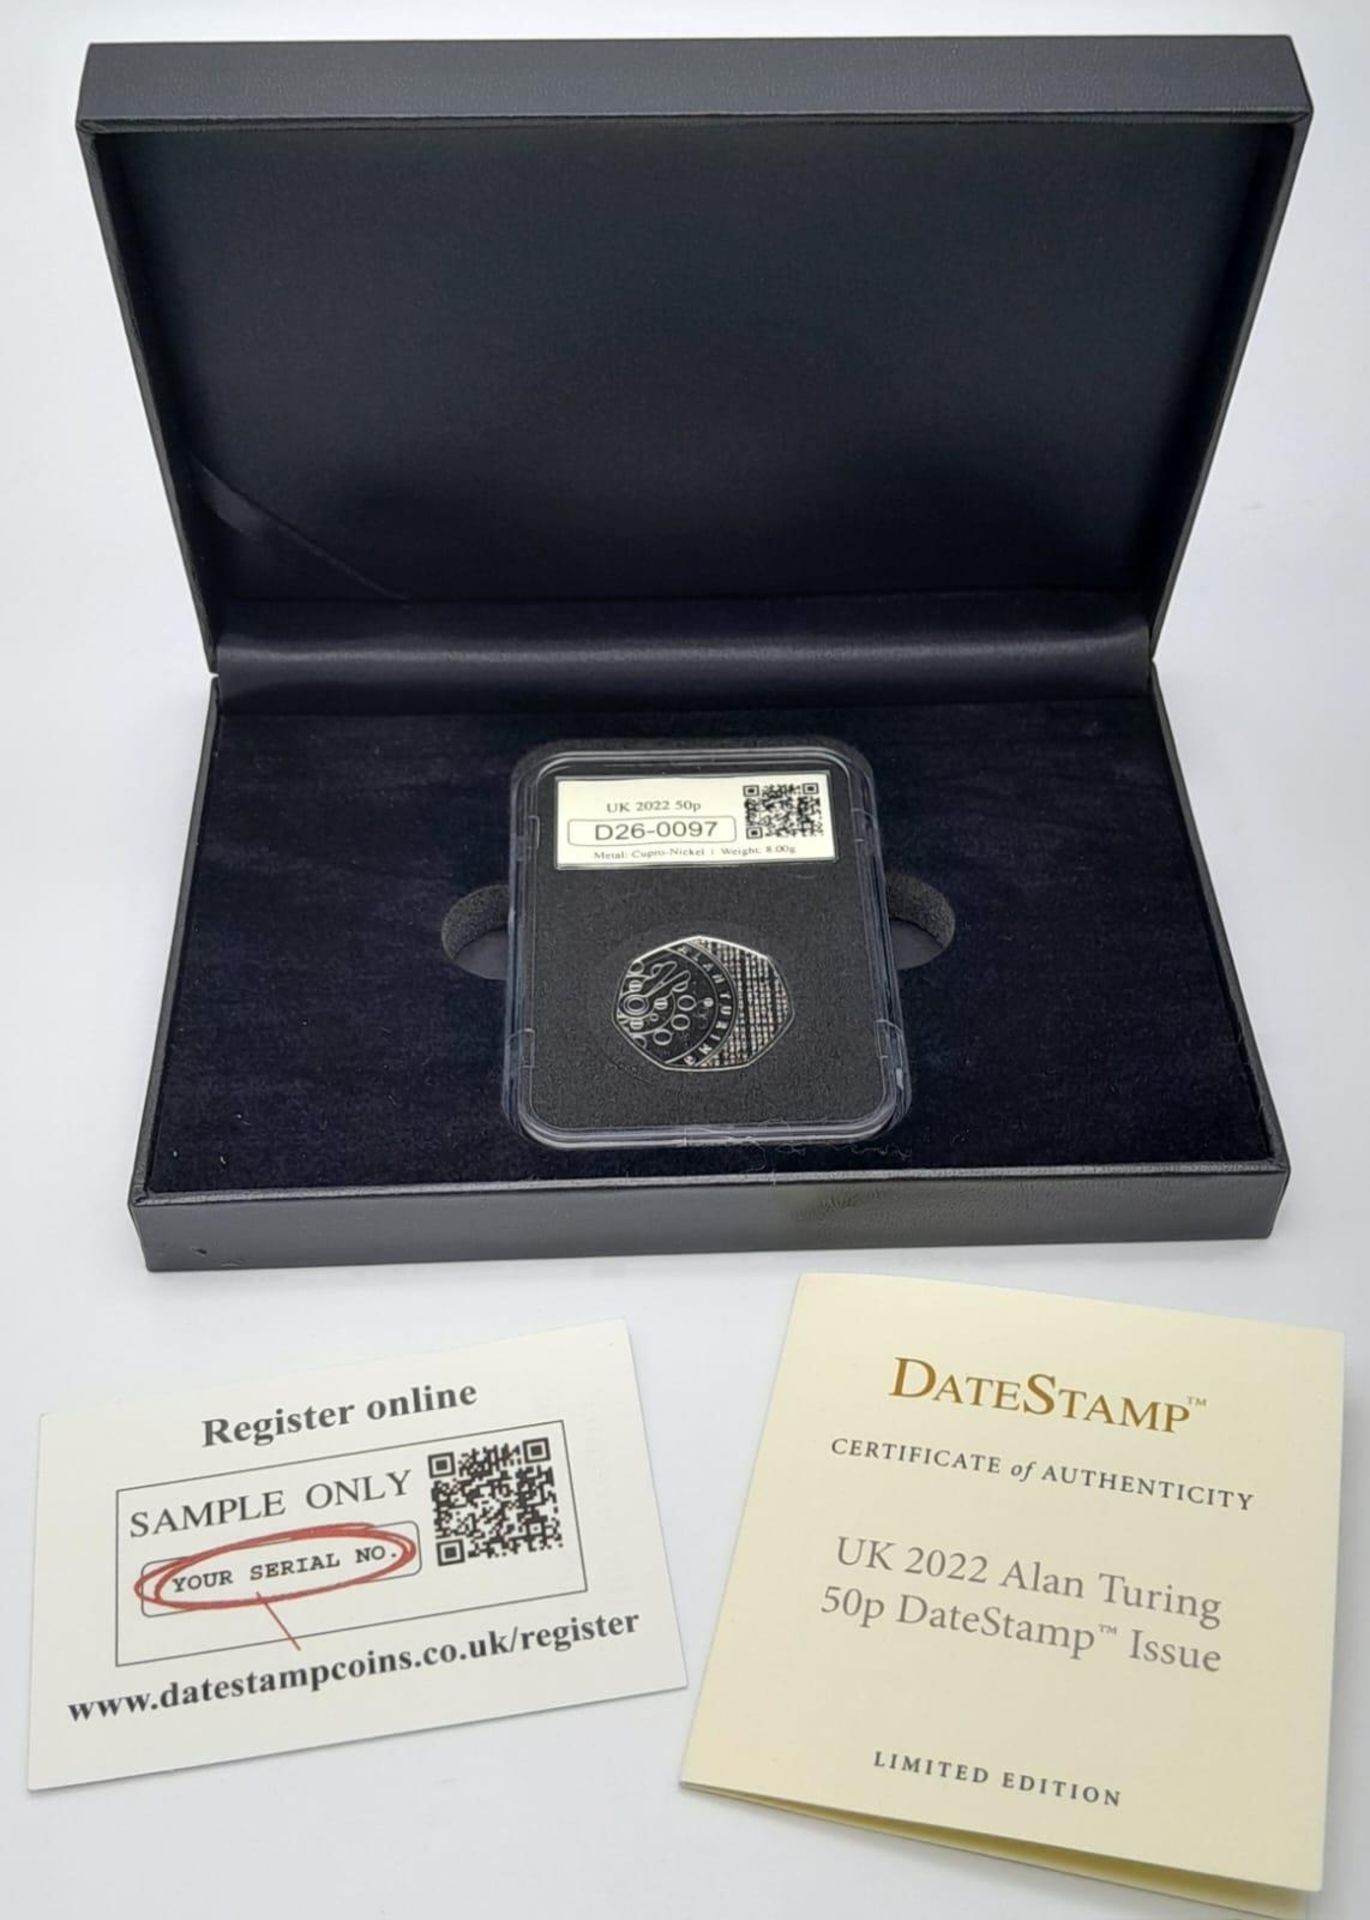 A Mint Condition, Limited Edition (1 of 500), 2022 Alan Turing 50 Pence Date Stamp Issue Coin